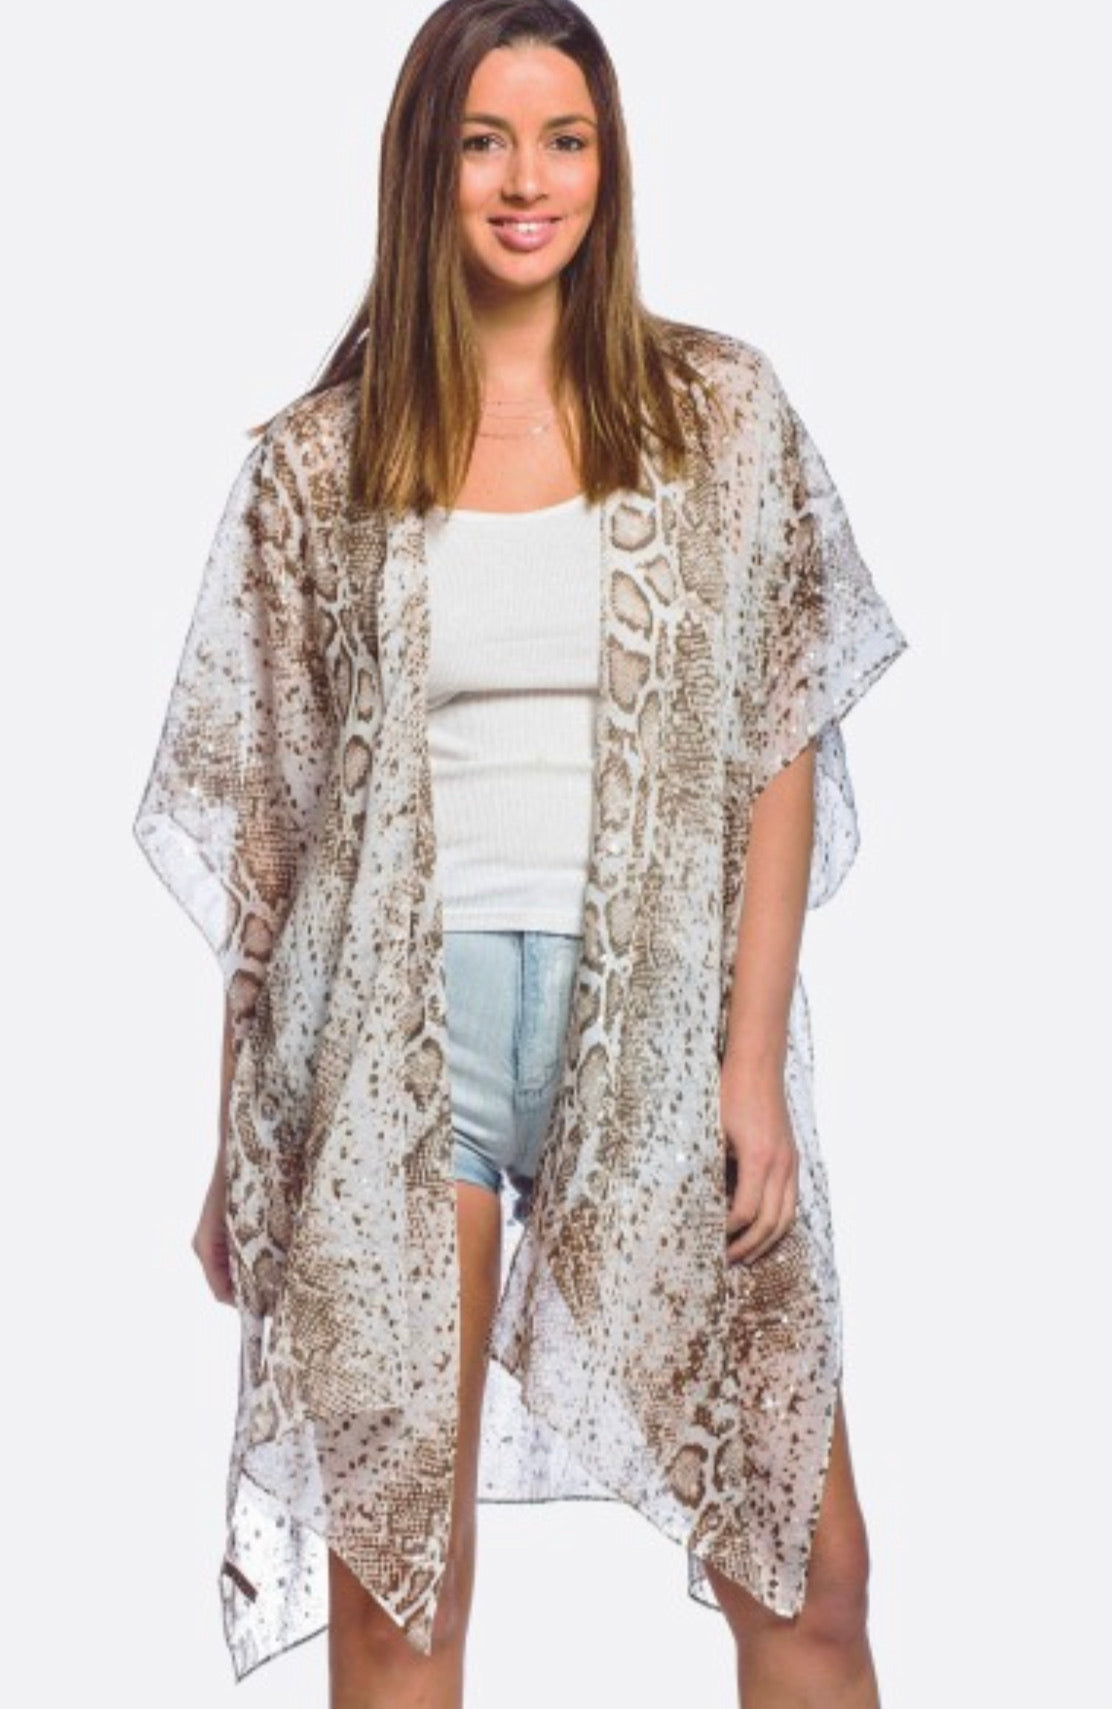 Lightweight Sheer Snakeskin Kimono with Silver Accents